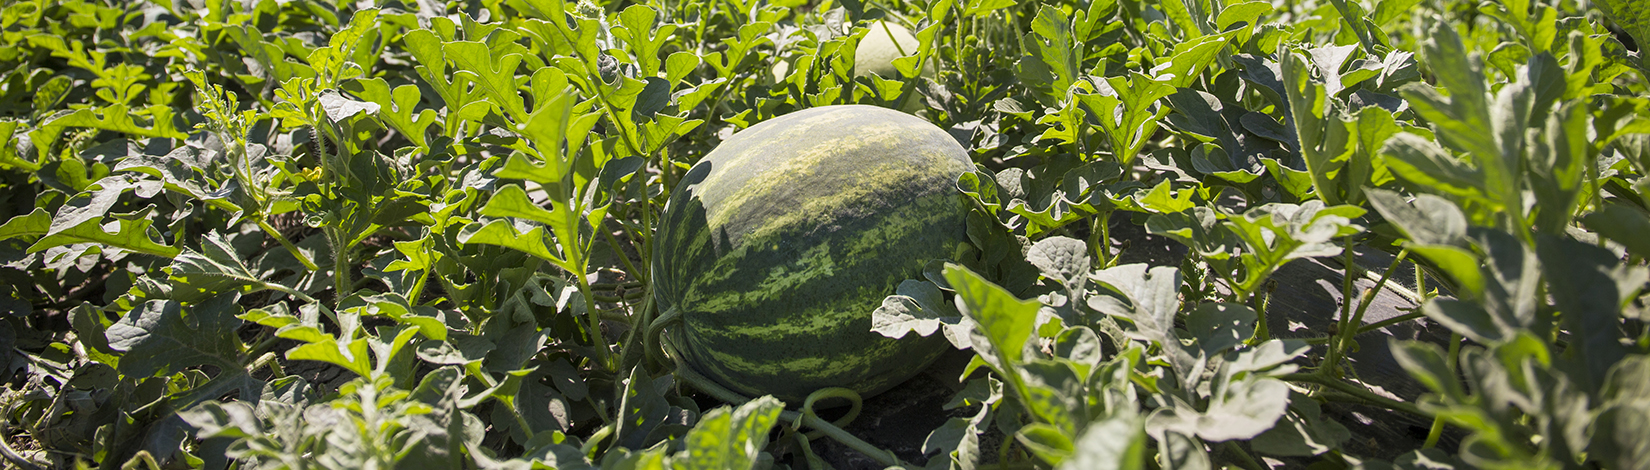 picture of a watermelon in a field